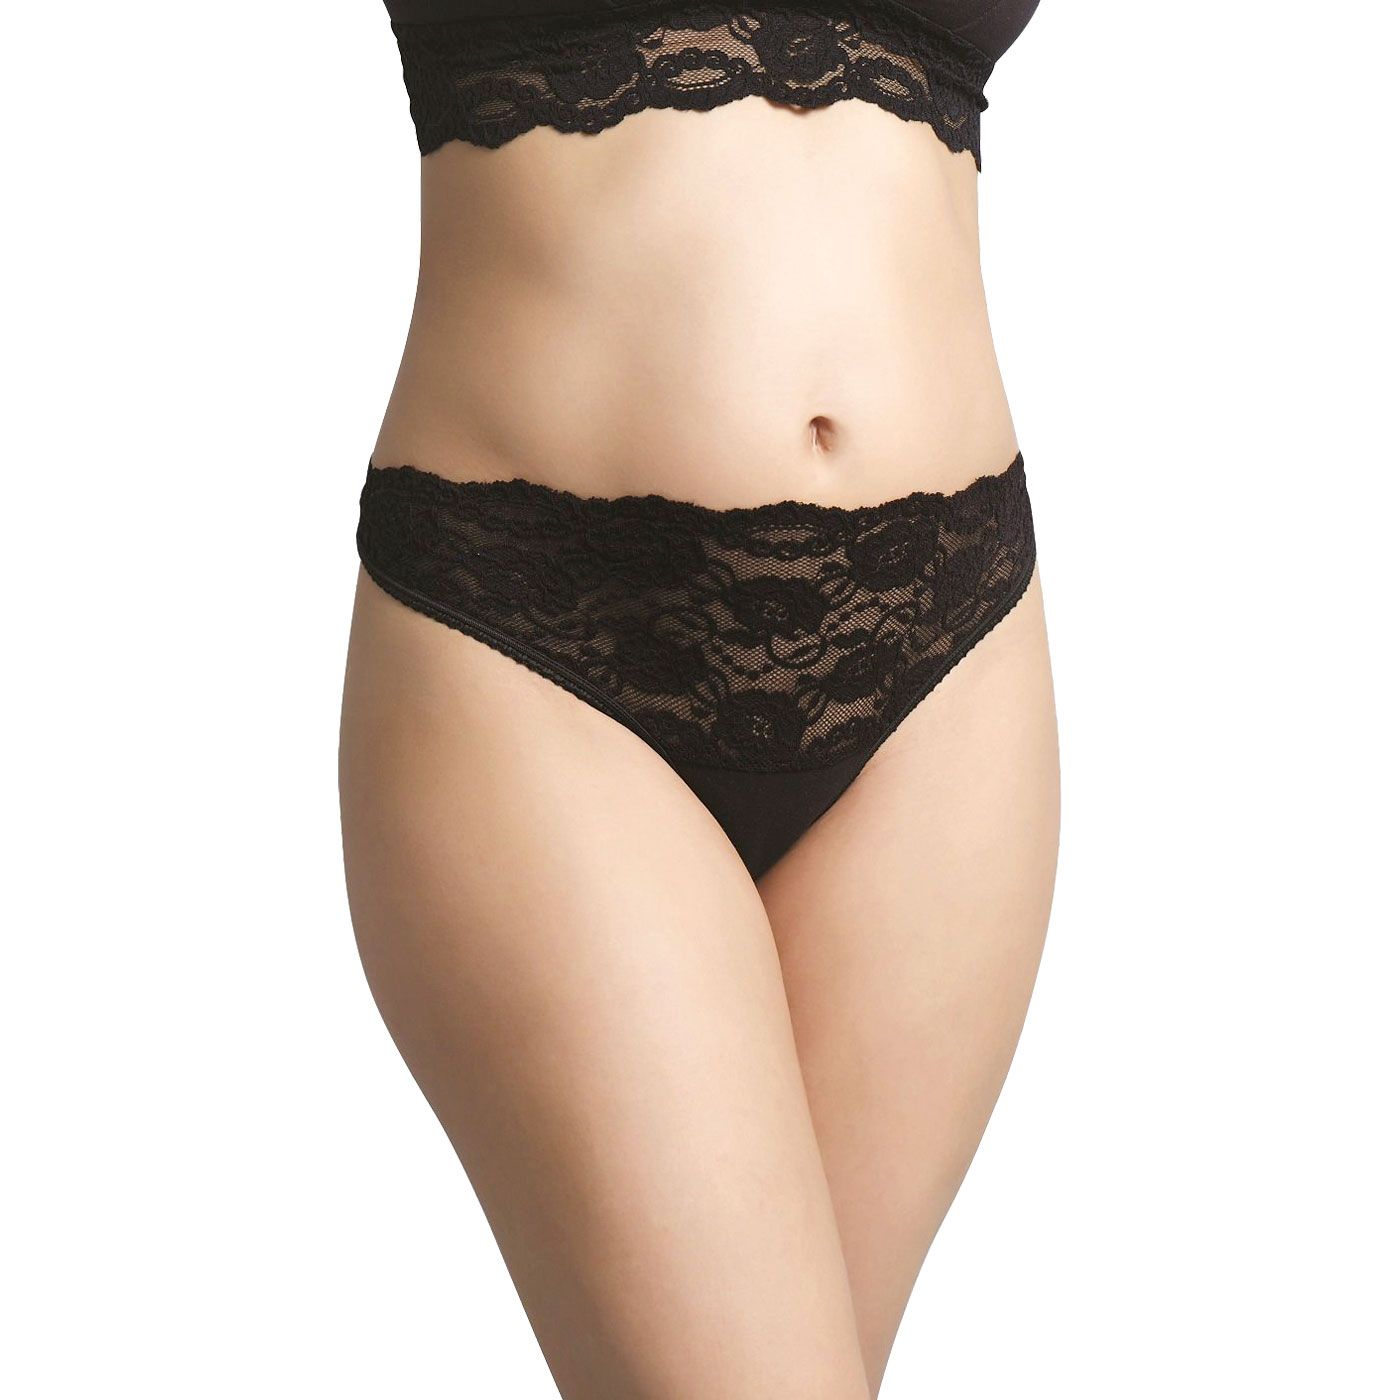 Carriwell Lace Stretch Panties-M-Black - 1